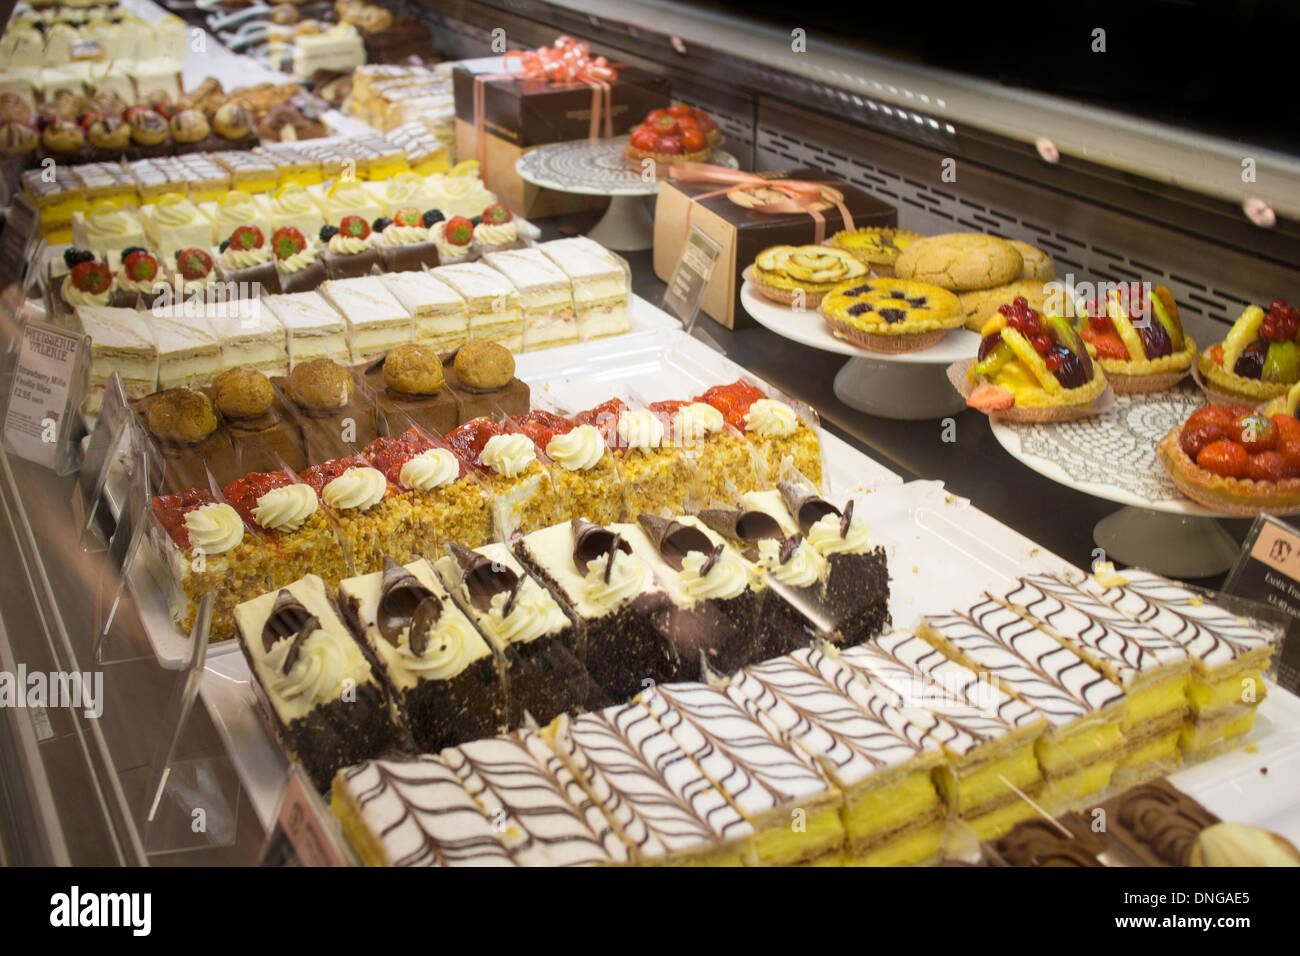 Patisserie Valerie cakes slices and patisseries on display Stock Photo